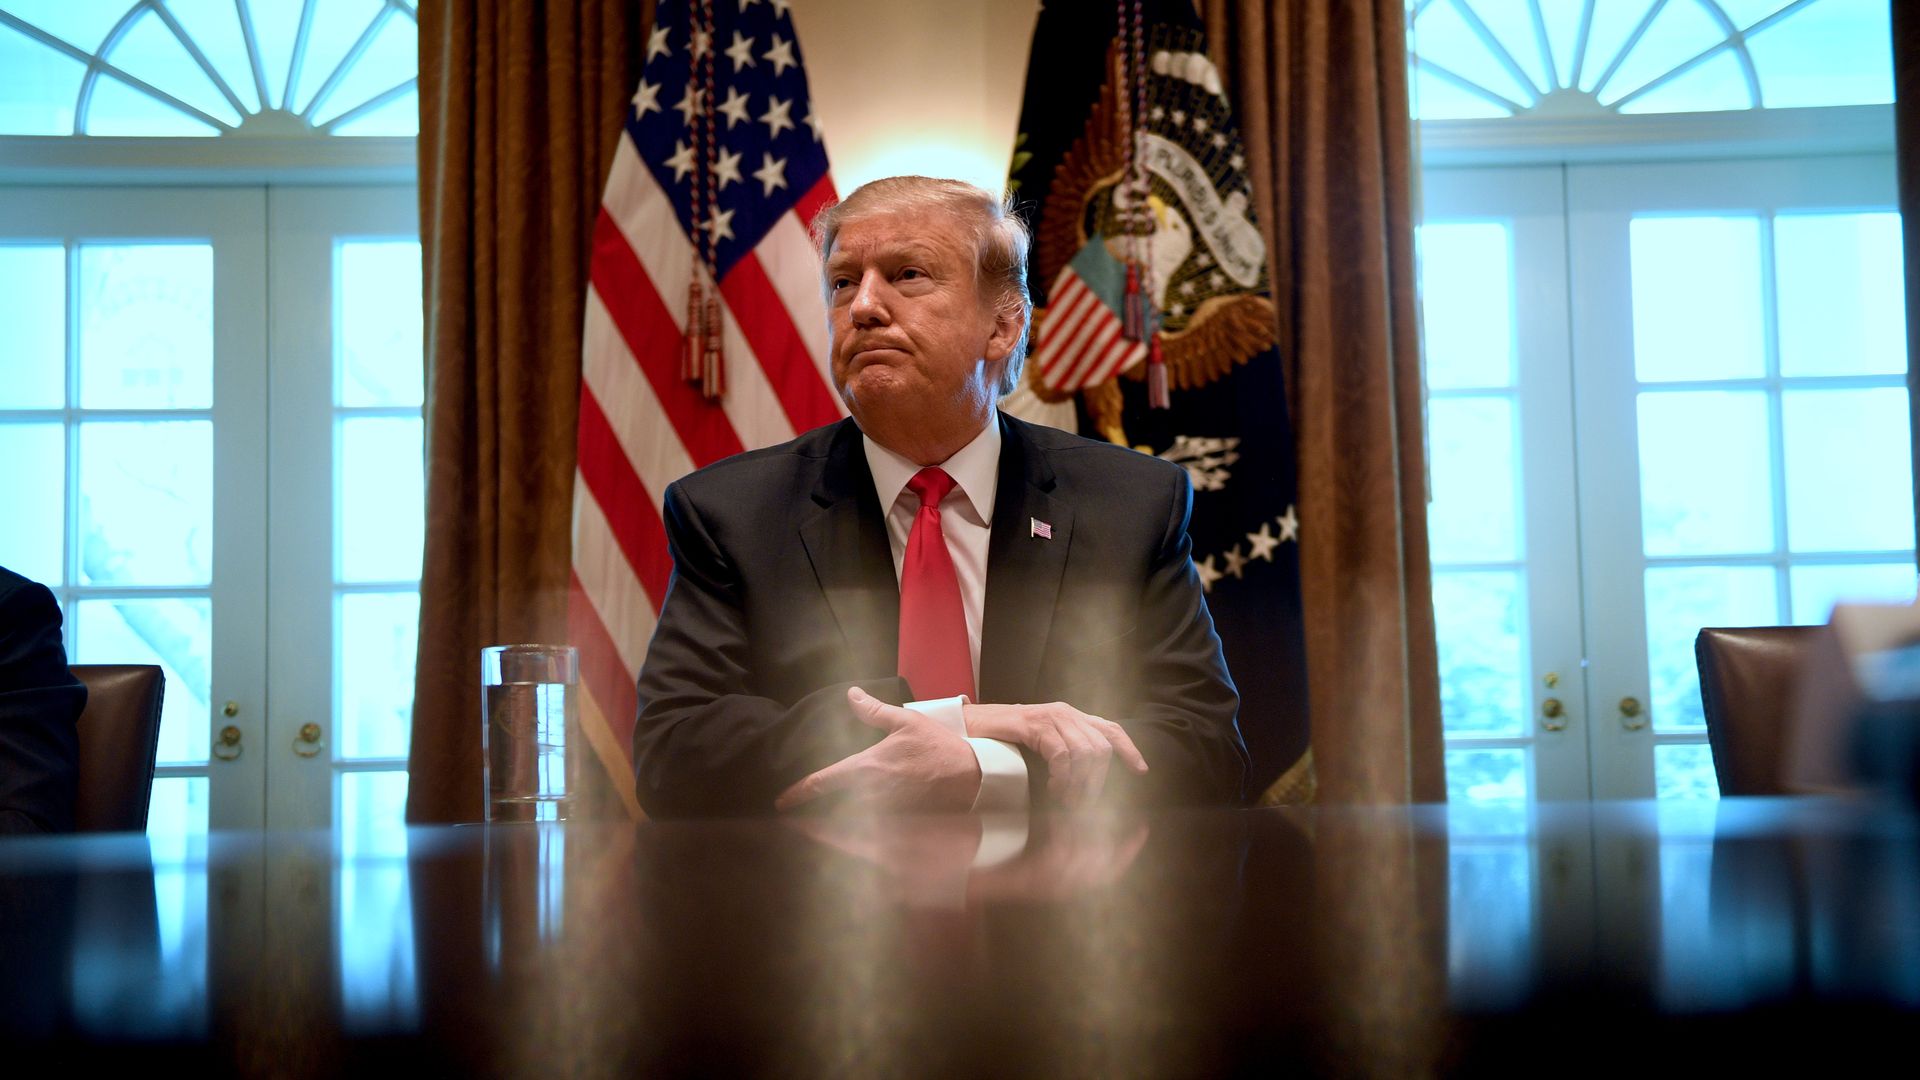 In this image, Trump sits at a desk with his hands folded and listens to someone out of view speak. There are two flags behind him.